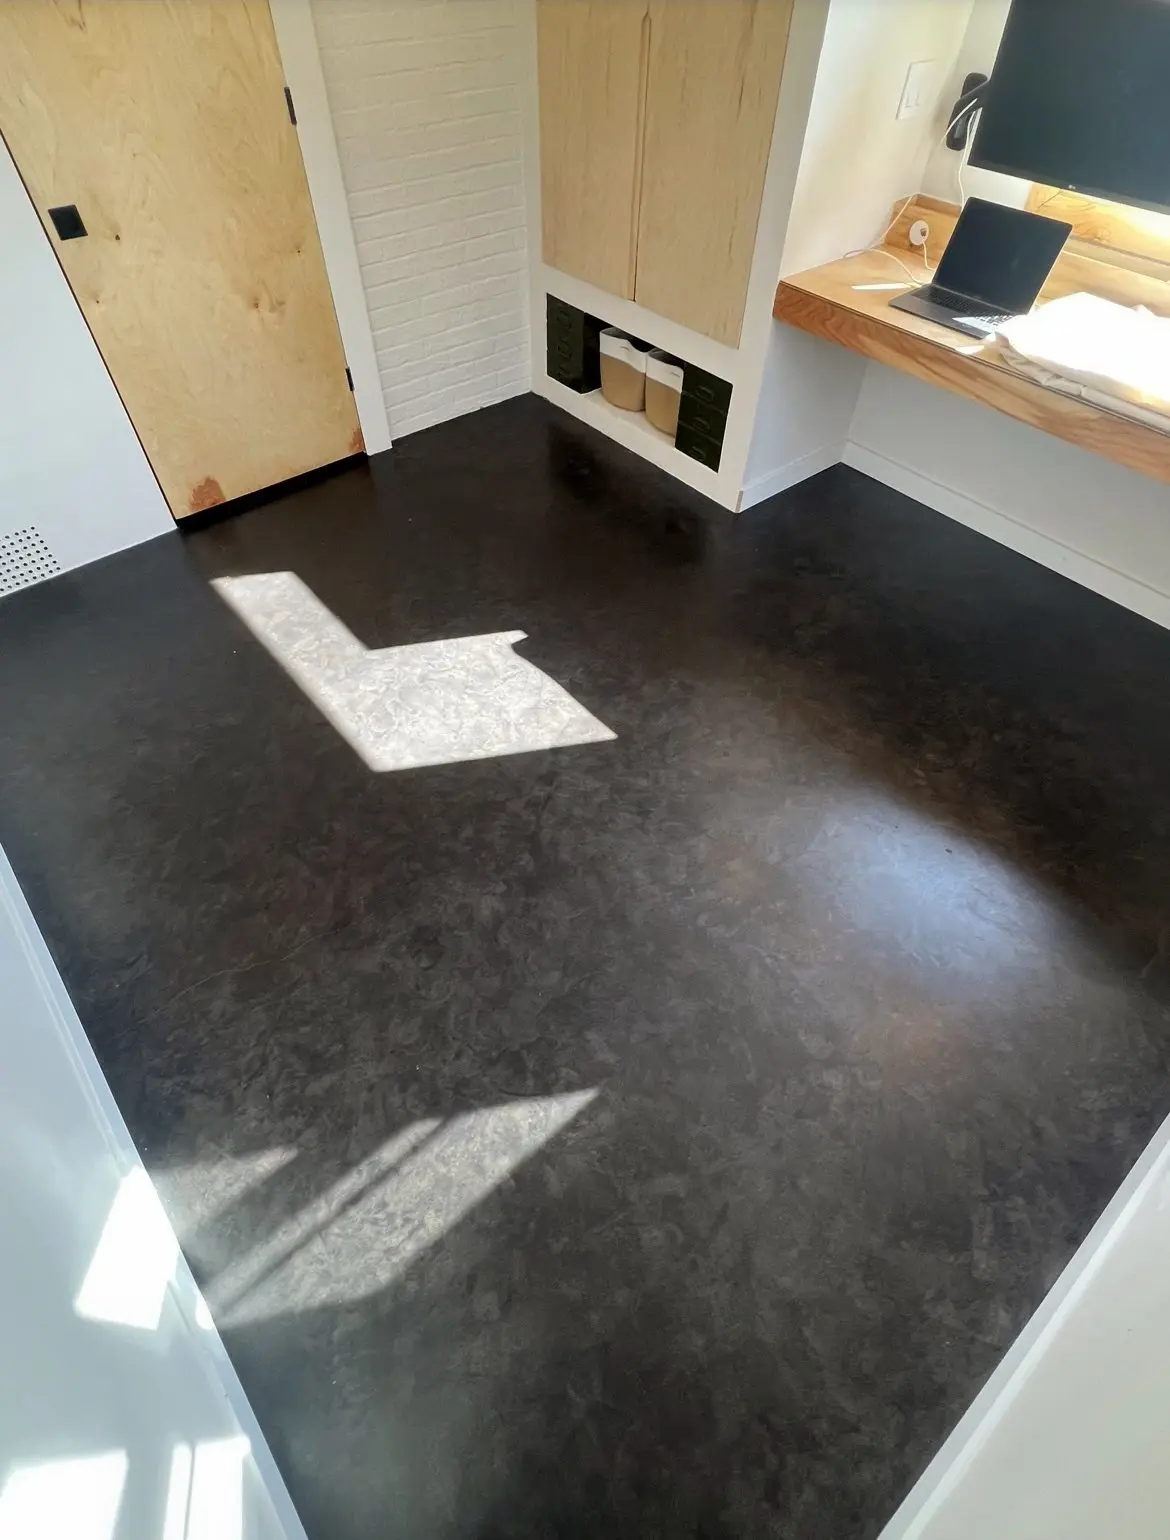 Final look of a concrete floor gleaming with a matte finish after the application of Behr Concrete Sealer.